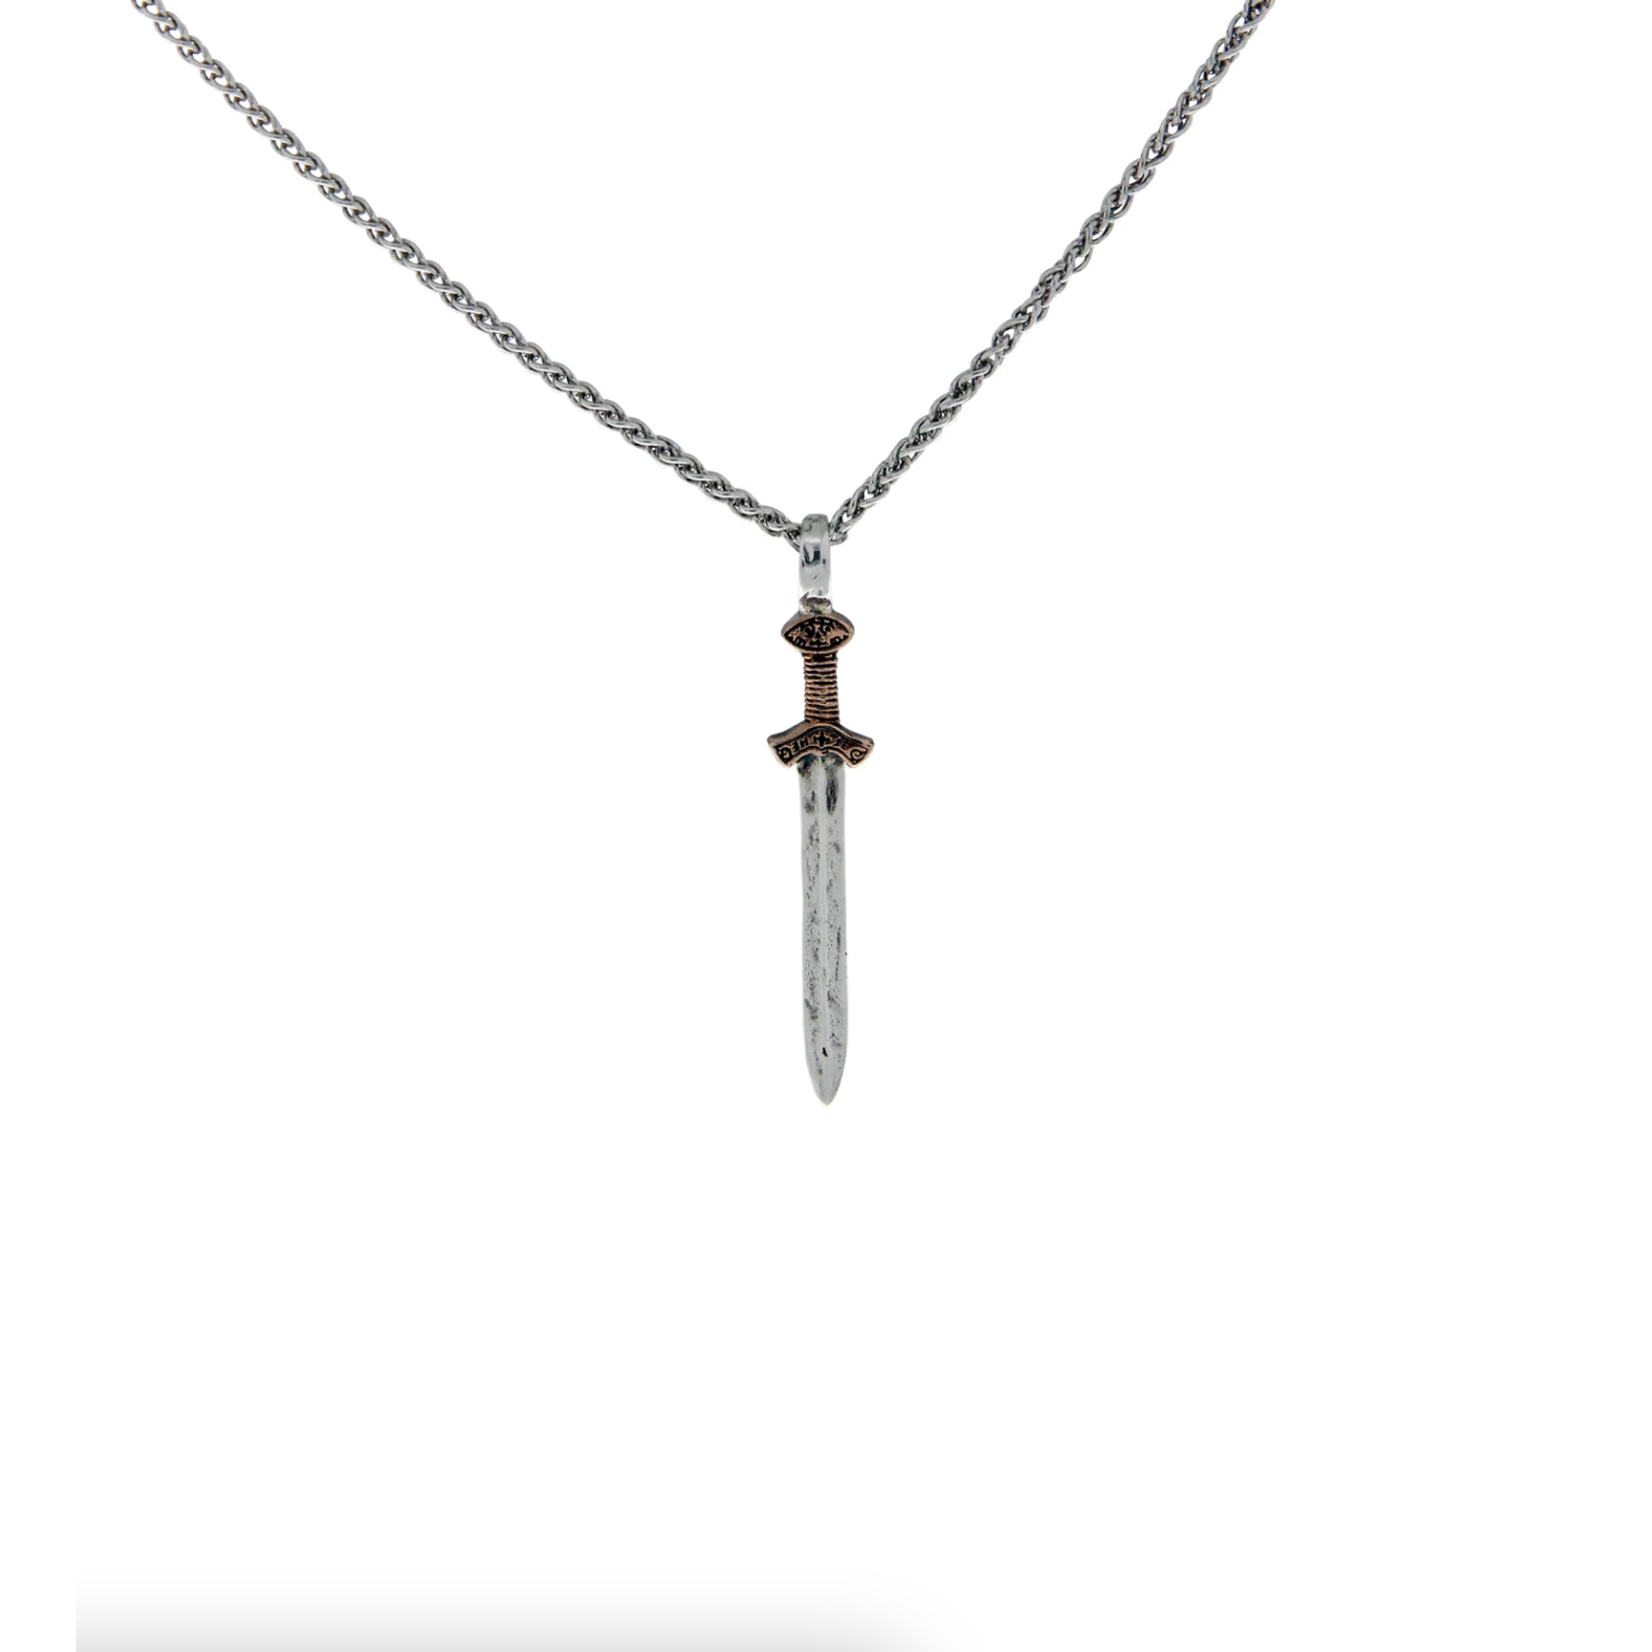 Keith Jack Silver and Bronze Small Viking Sword Necklace